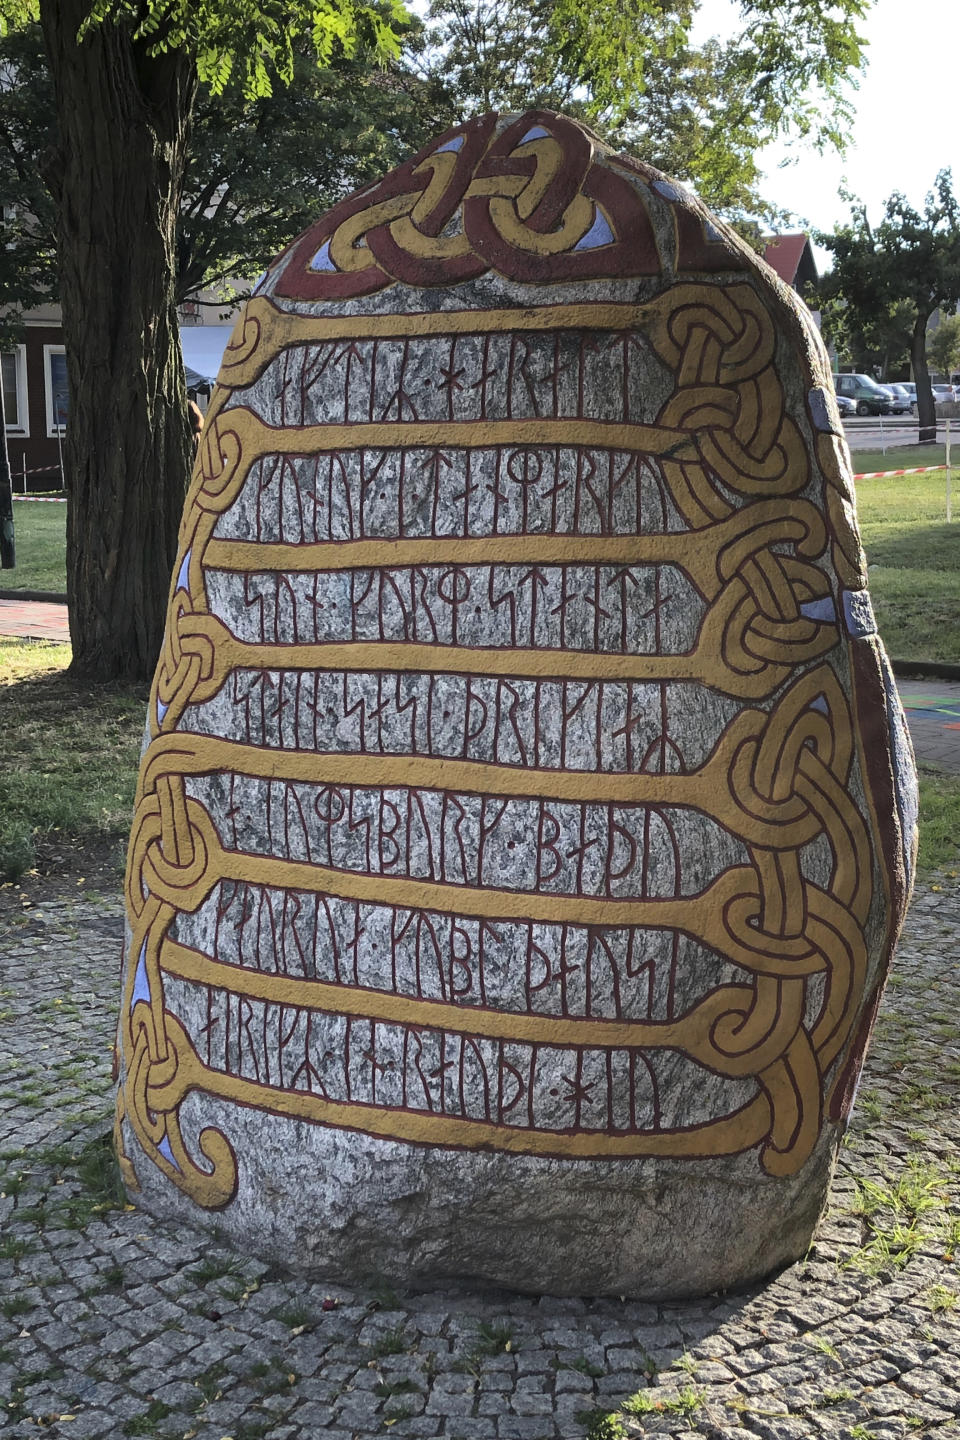 A view of a 2014 stone with runic inscription in memory of Danish 10th century King Harald “Bluetooth” Gormsson, in Wolin, Poland, Saturday, July 30,2022. More than 1,000 years after his death in what is now Poland, a Danish king whose nickname is known to the world through the Bluetooth technology is at the center of an archeological dispute. A Polish researcher and a Swedish archeologist claim that they have pinpointed the probable burial site for King Harald Bluetooth Gormsson in a small village in northwestern Poland, an area that once had ties with the Vikings. (AP Photo Monika Scislowska)